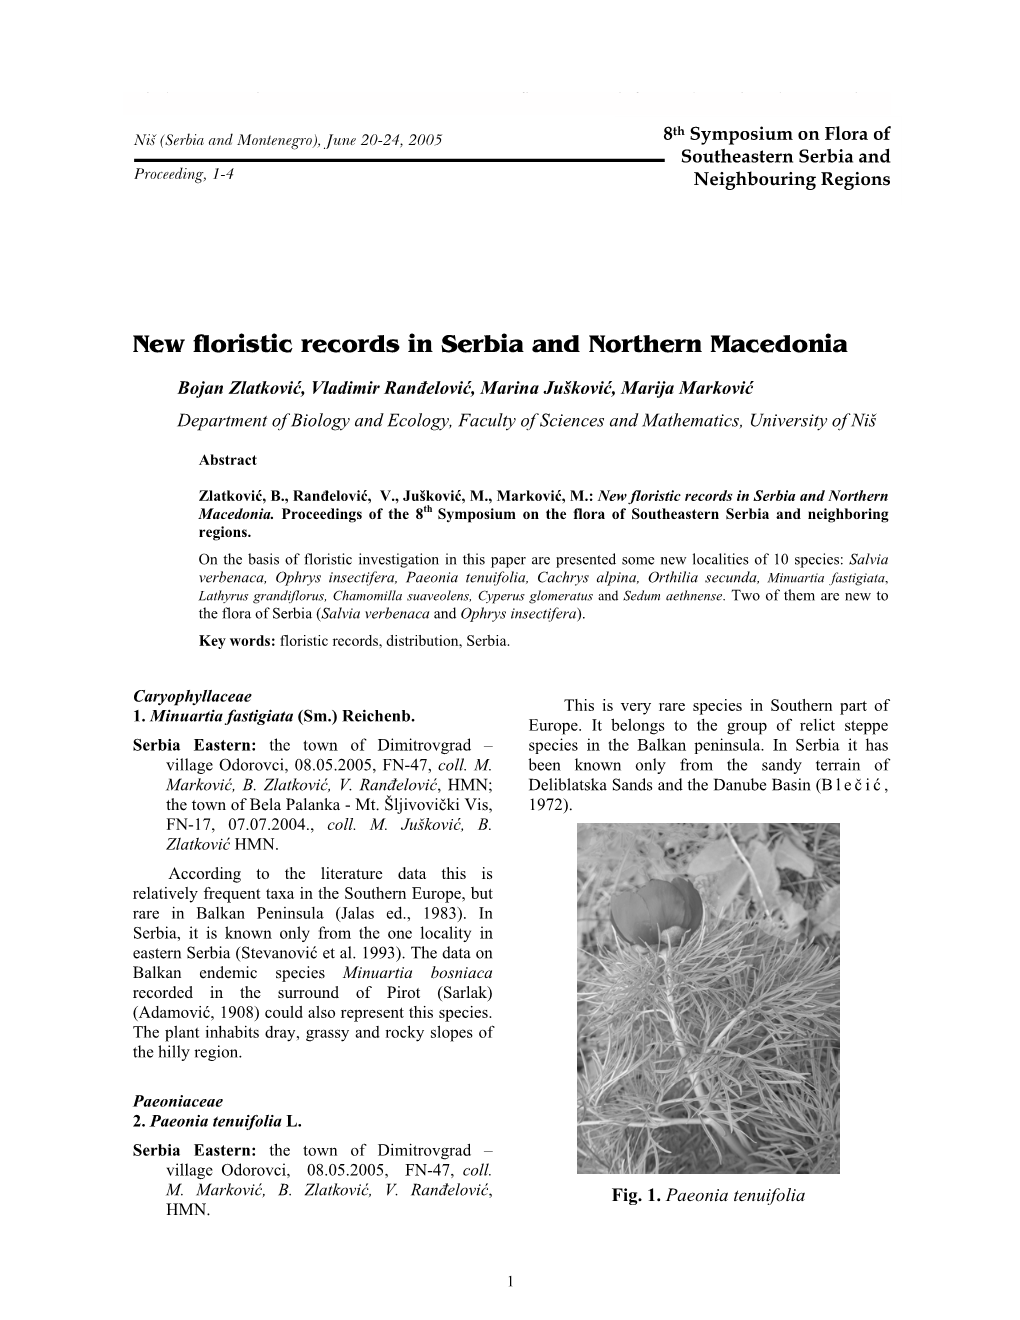 New Floristic Records in Serbia and Northern Macedonia